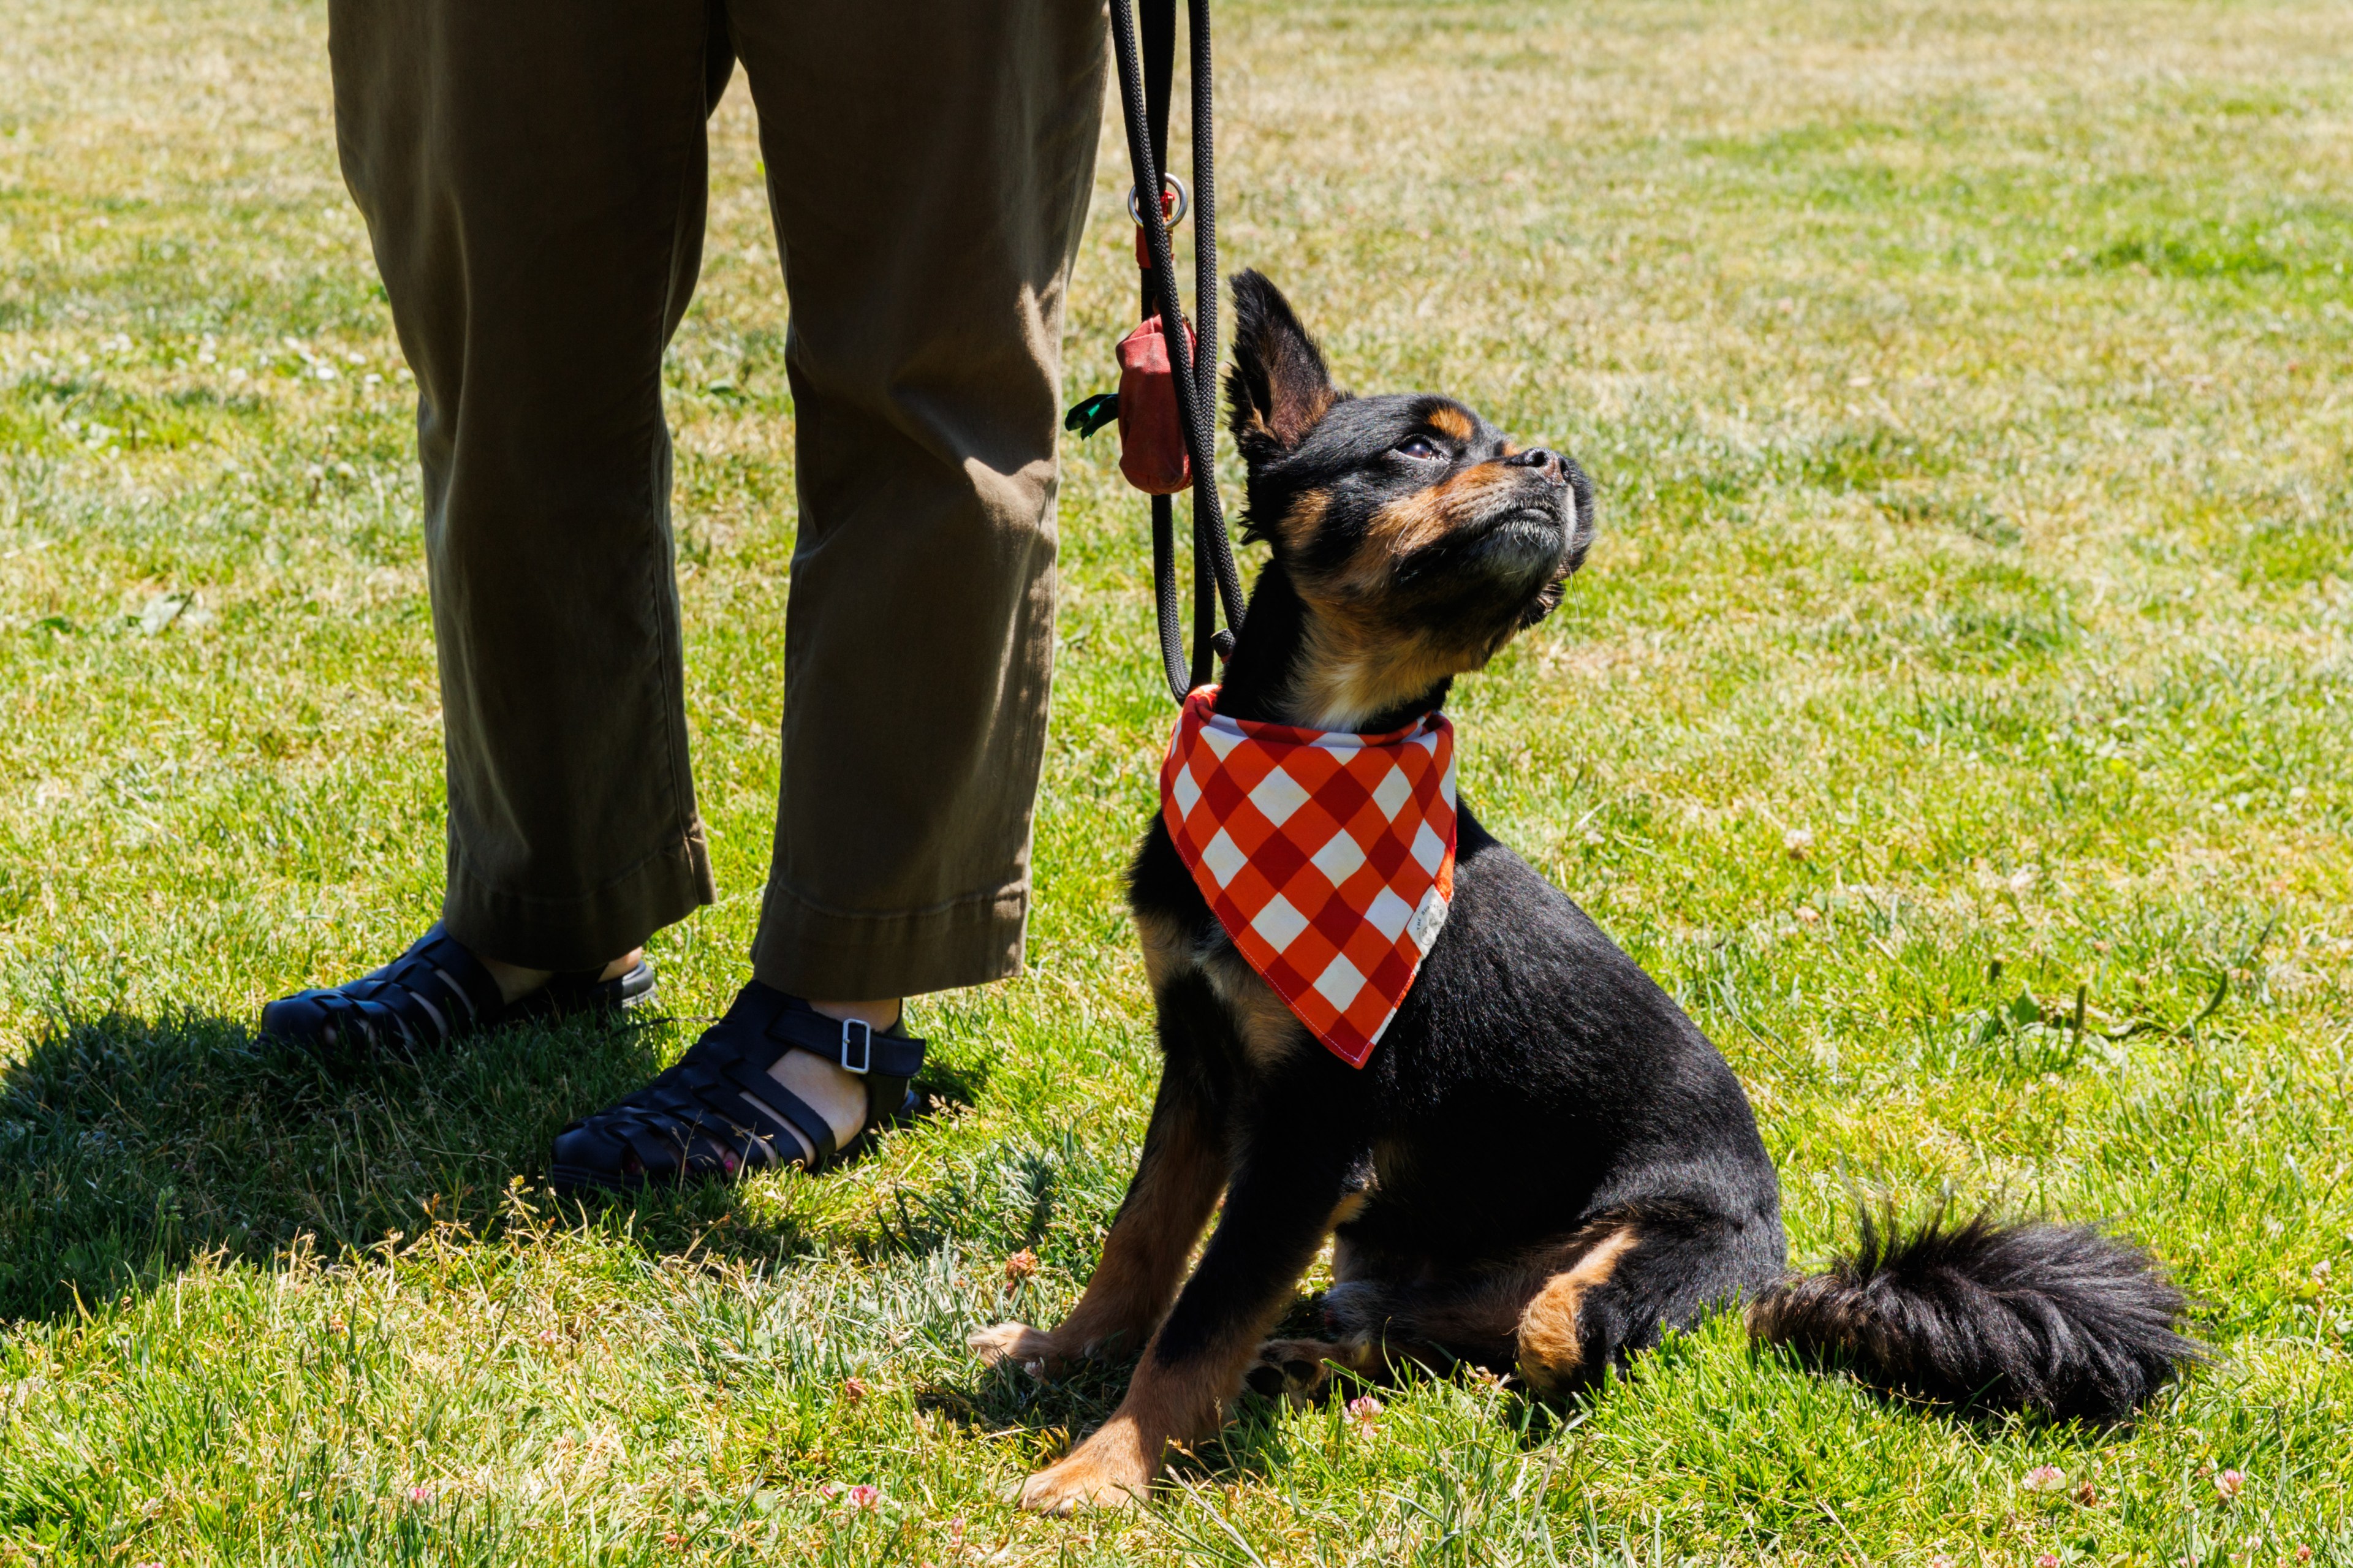 A small dog with a black and tan coat sits on the grass wearing an orange and white checkered bandana, next to a person dressed in brown pants and black shoes.